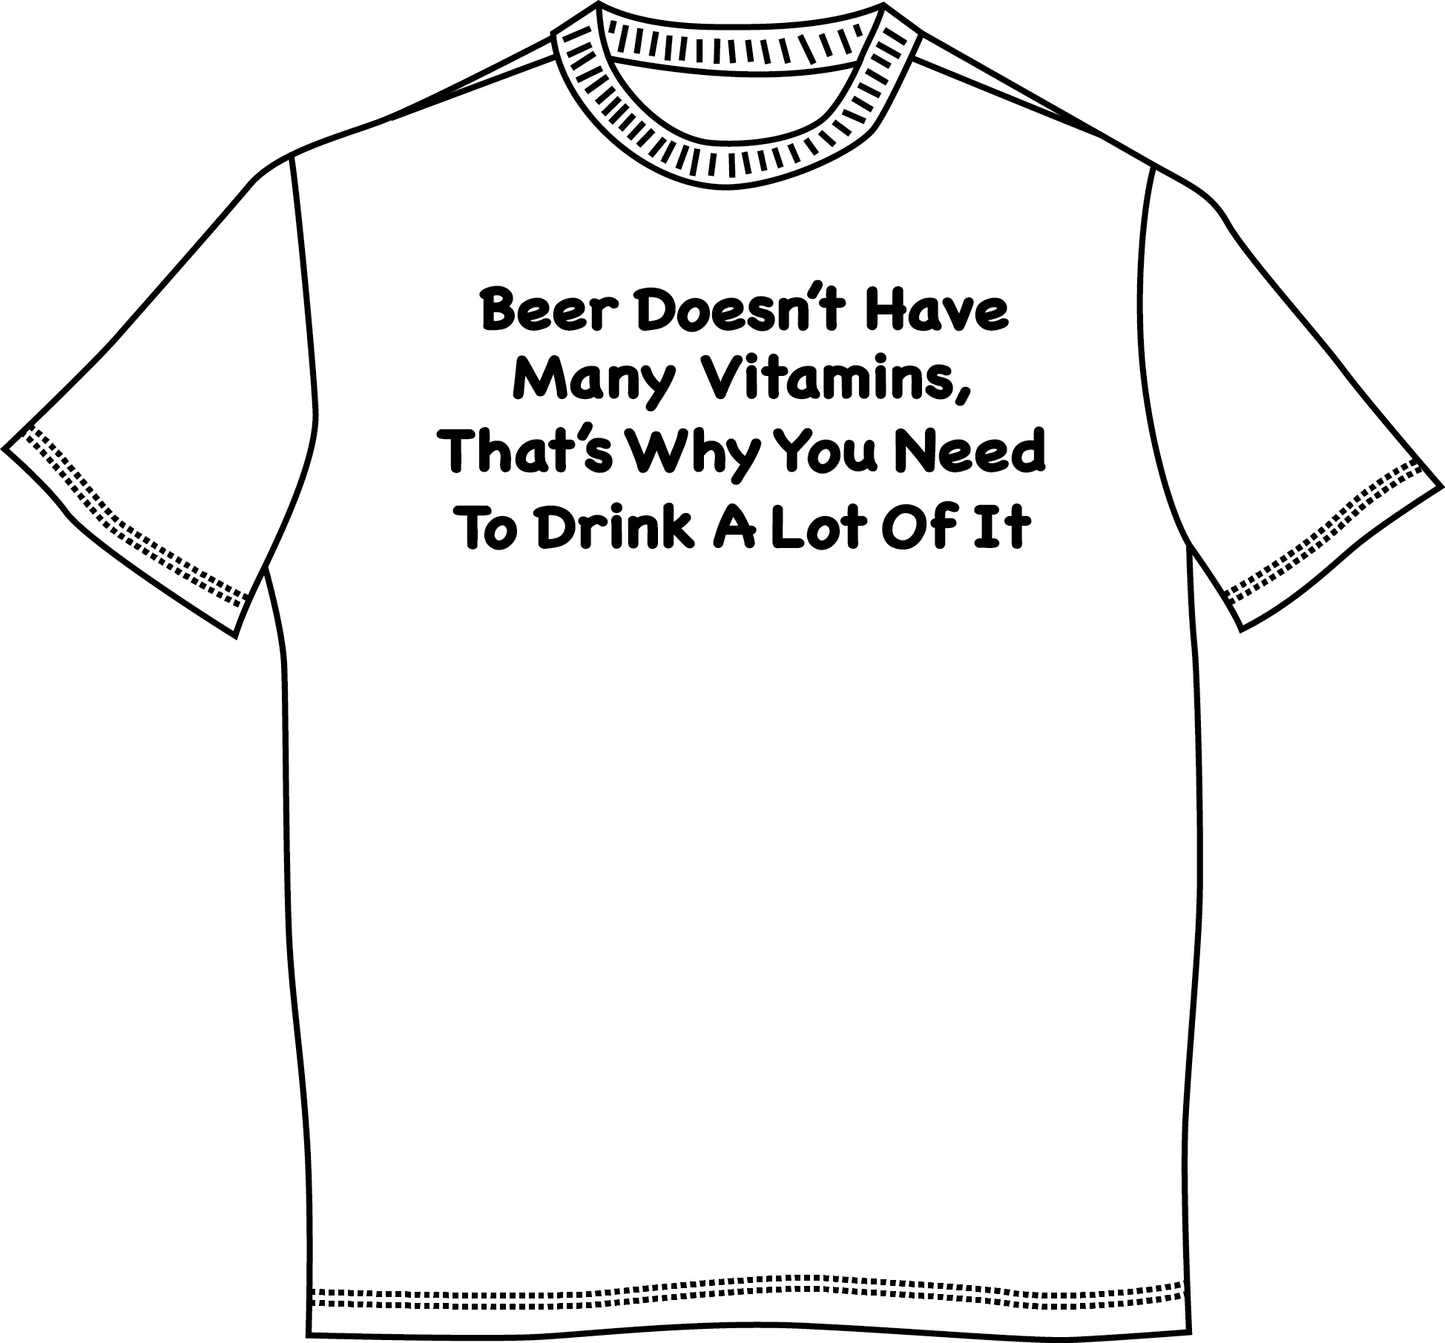 "Beer Doesn't have many Vitamins, That's Why You Need To Drink A Lot Of It" Mens Short Sleeve T-Shirt